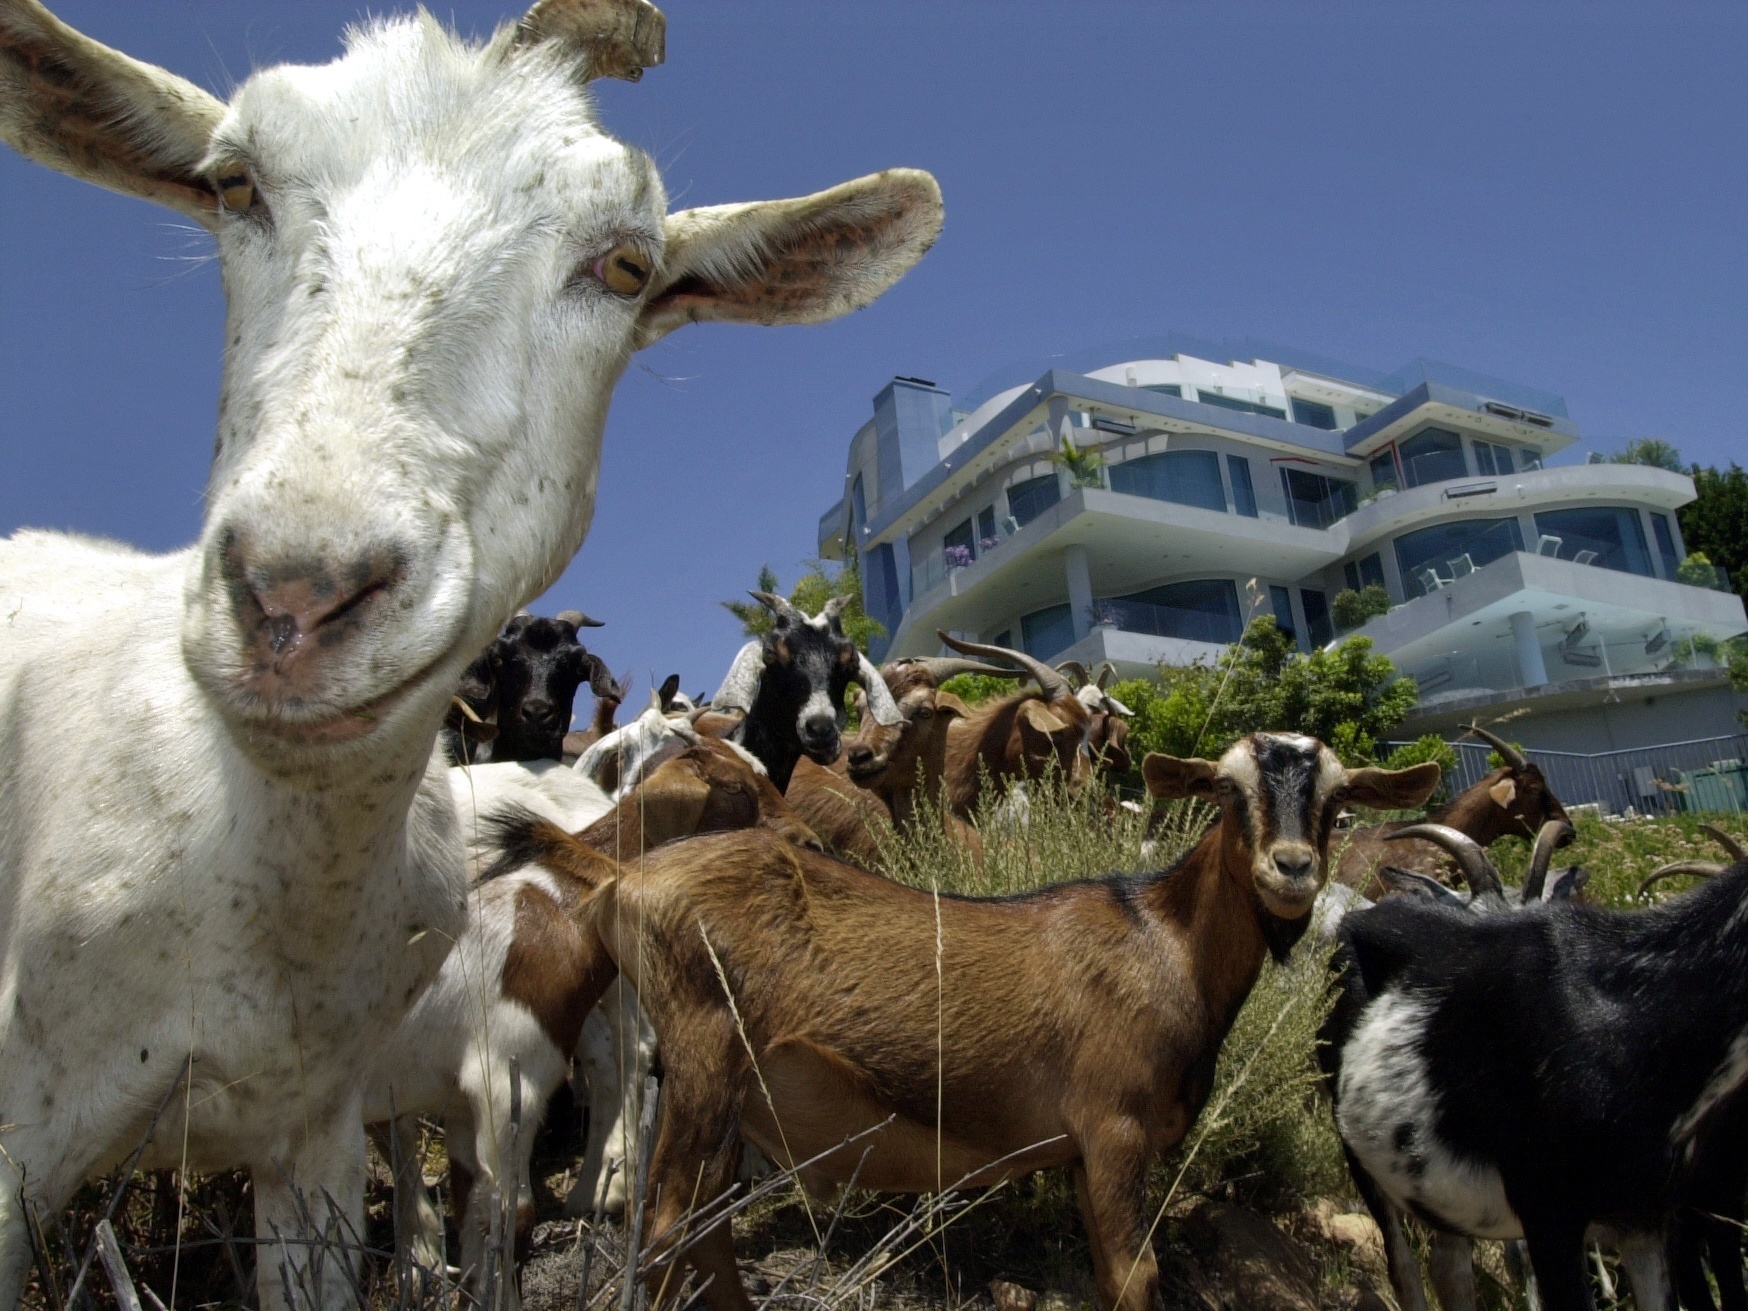 Disclaimer: These are not the goats that went on the lam in Boise. But they sure look just as sassy. (Photo by David McNew/Newsmakers/Getty Images)